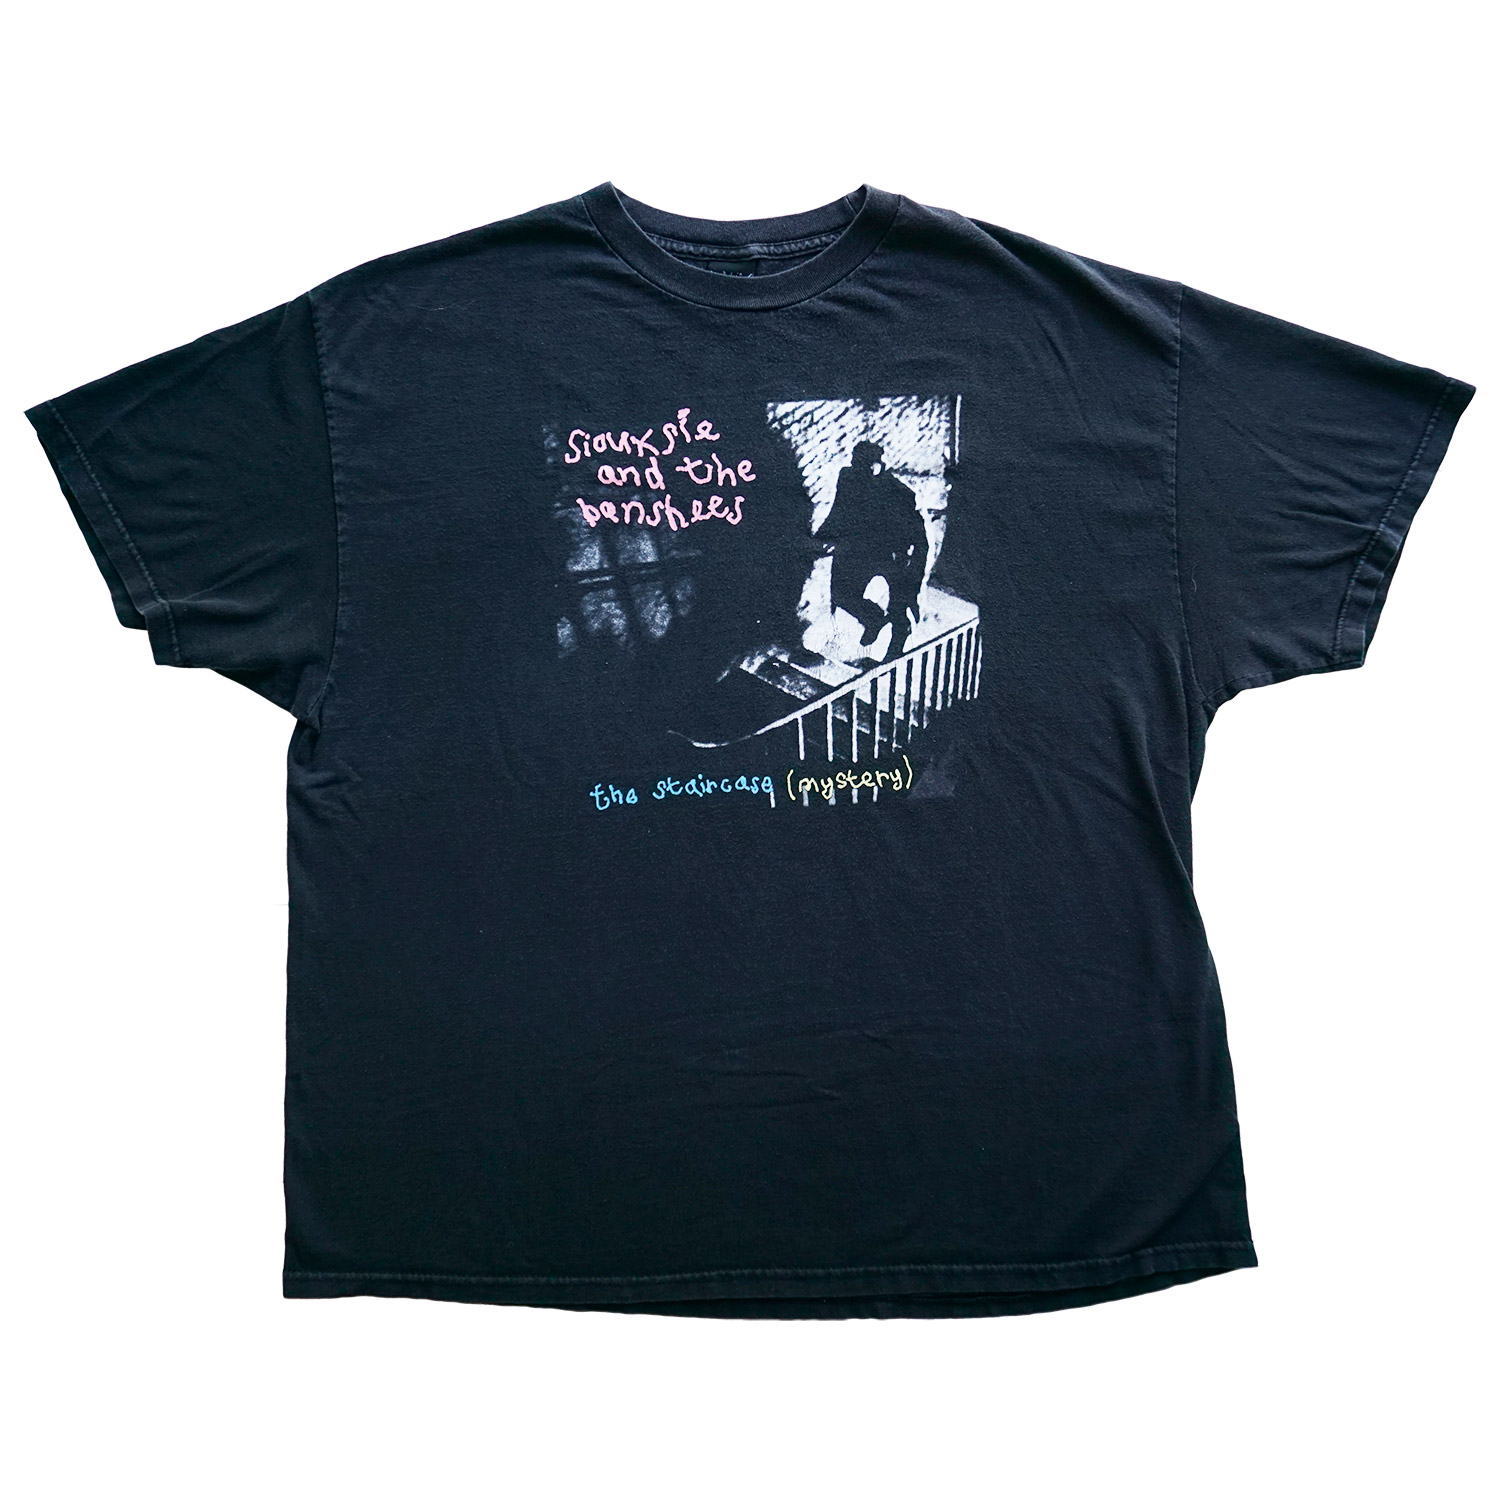 Vintage Siouxsie and the Banshees The Staircase (Mystery) T-shirt, Front